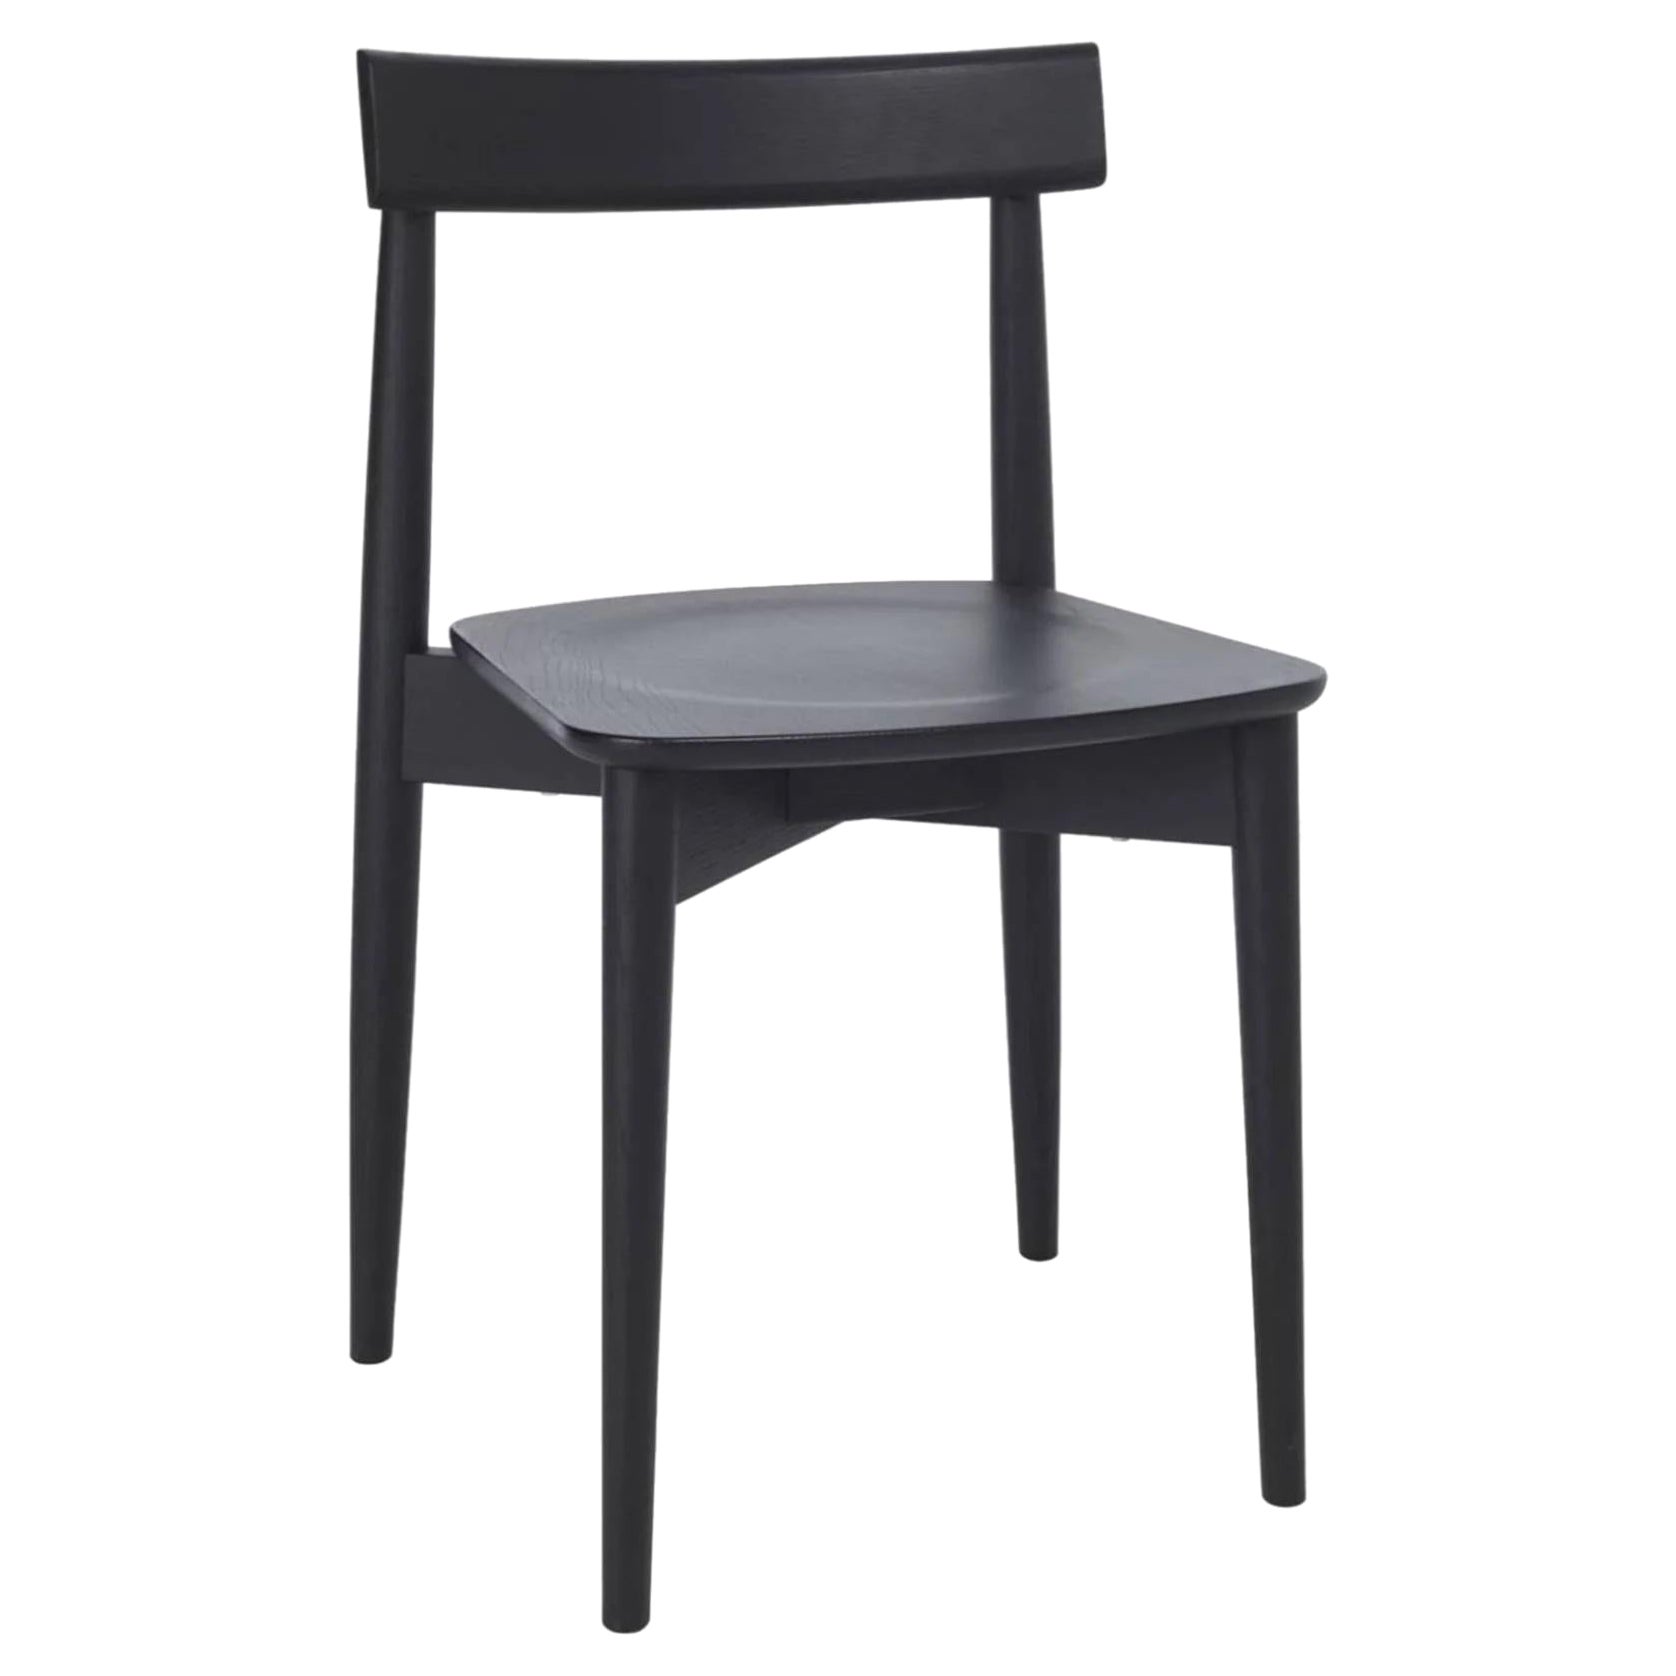 Customizable L.Ercolani Lara Black Chair Designed by Dylan Freeth in Stock For Sale